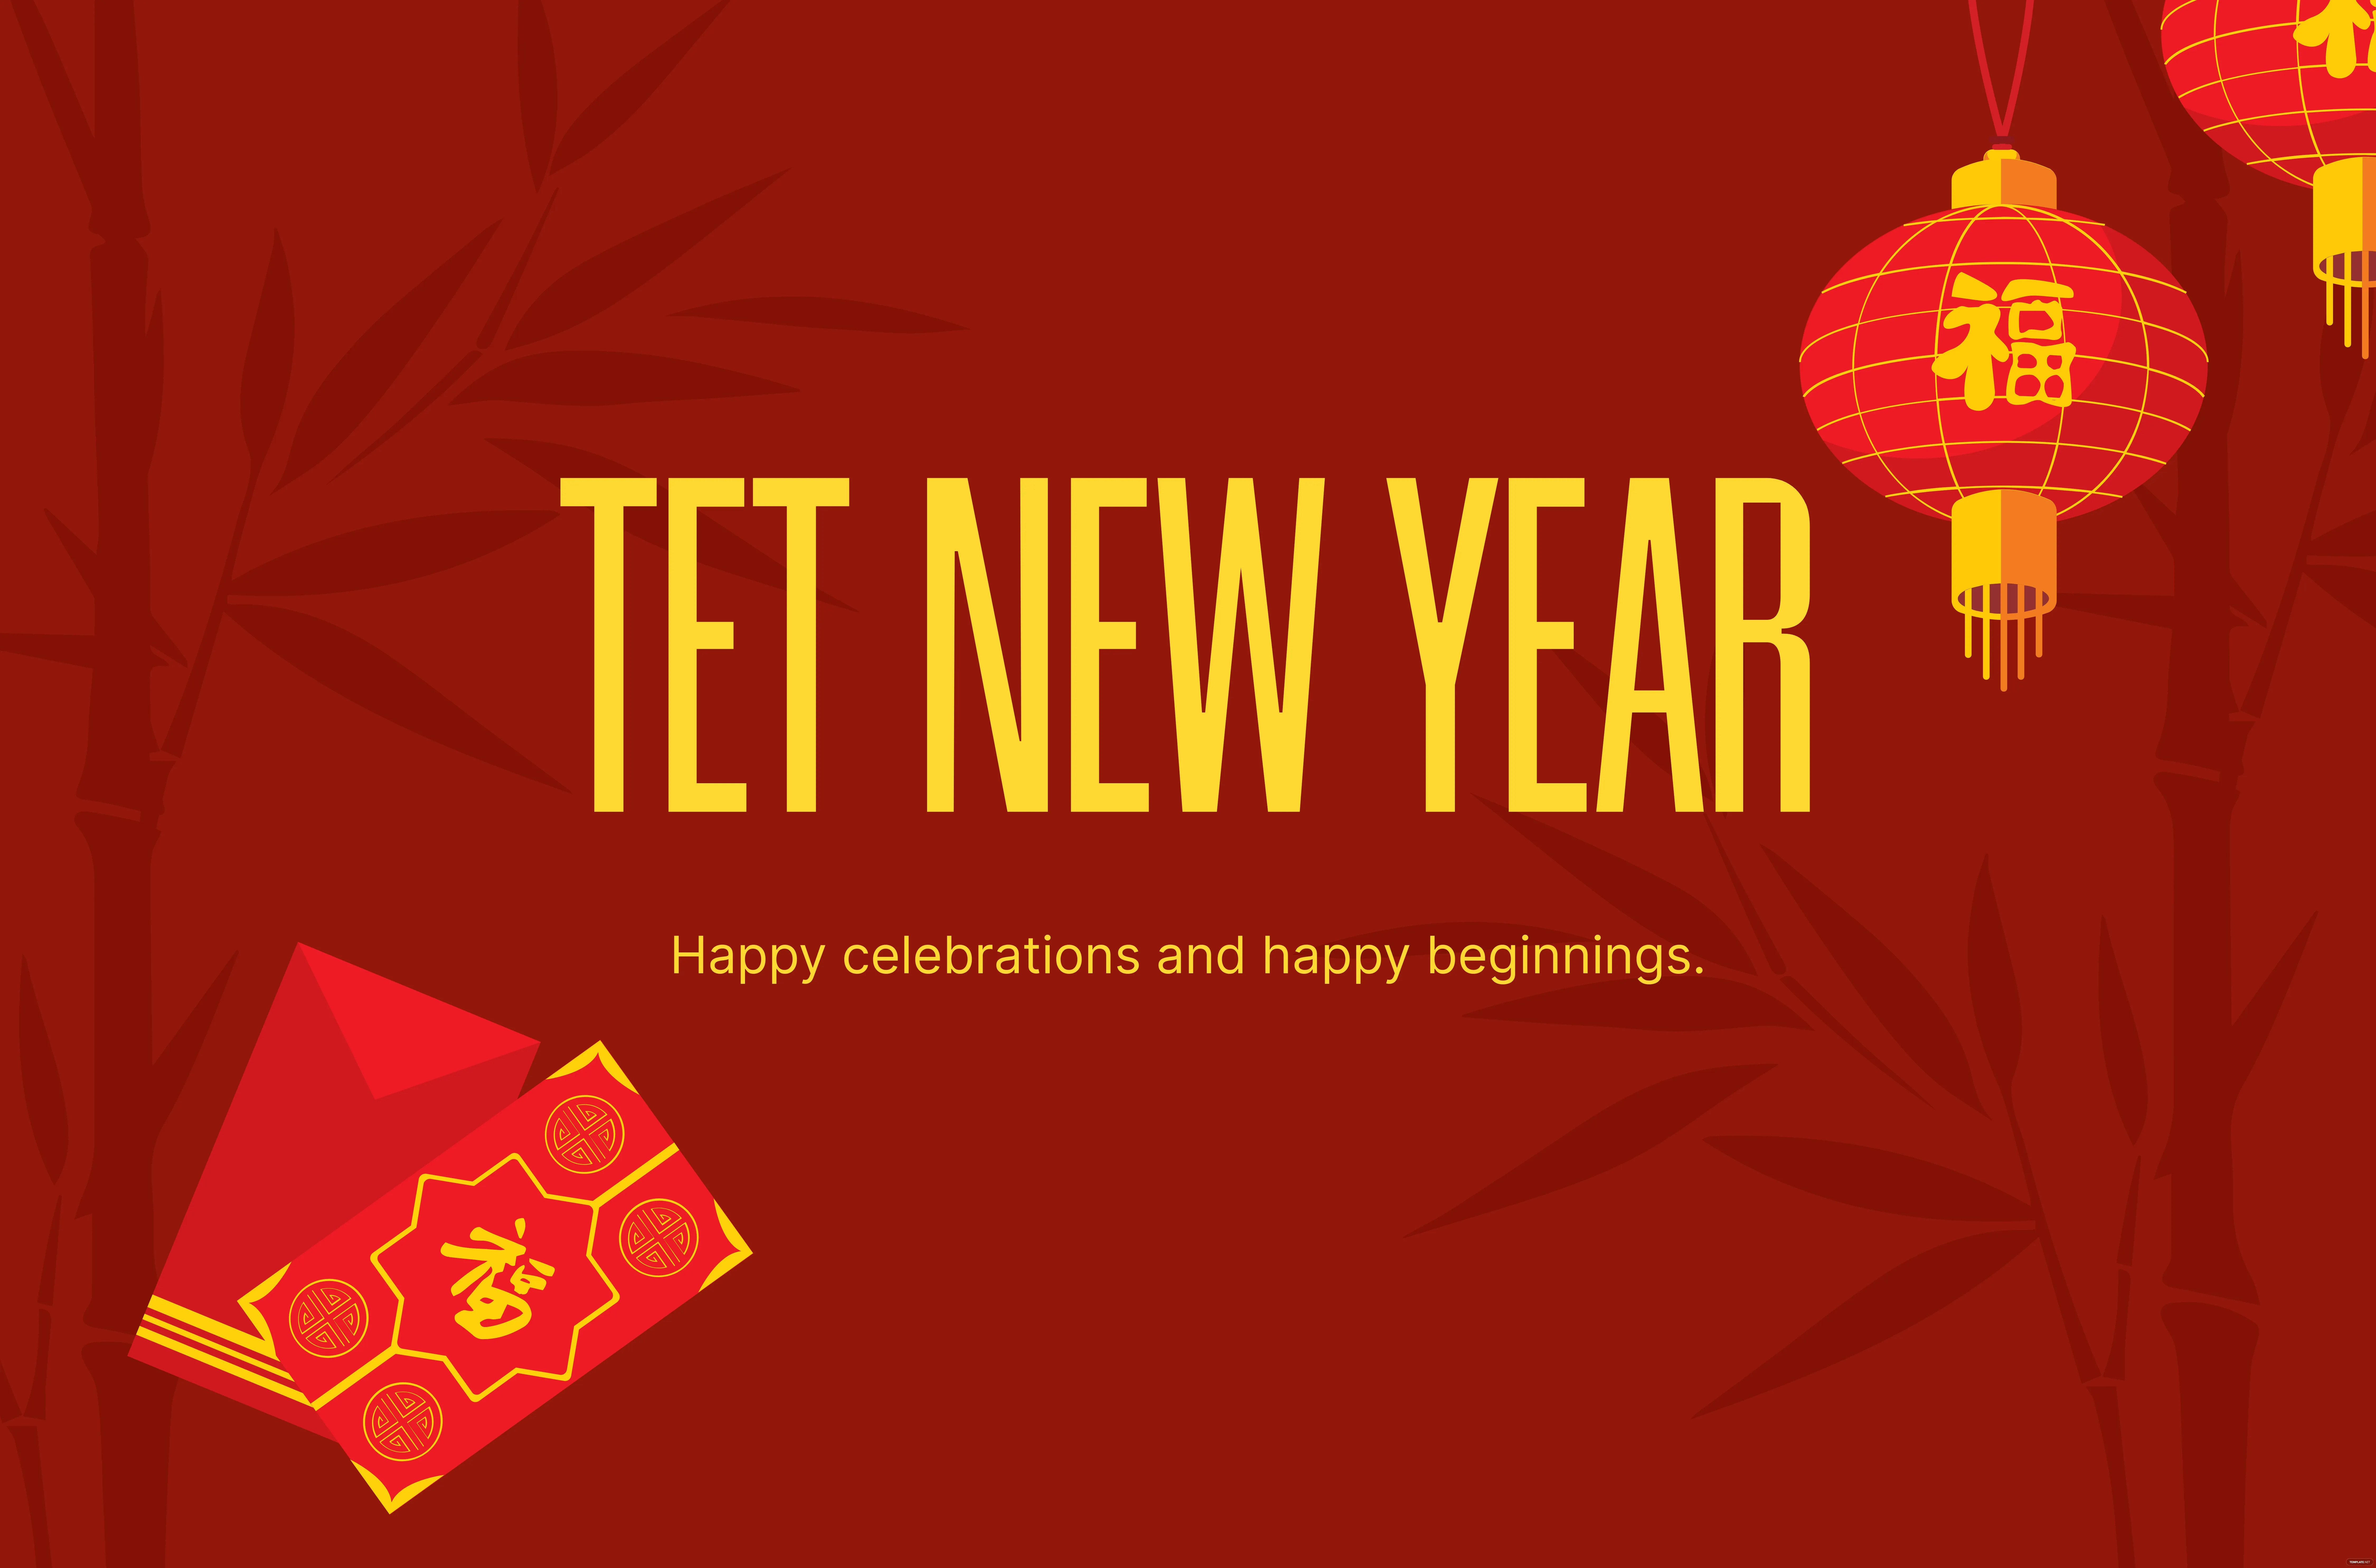 tet new year banner ideas and examples